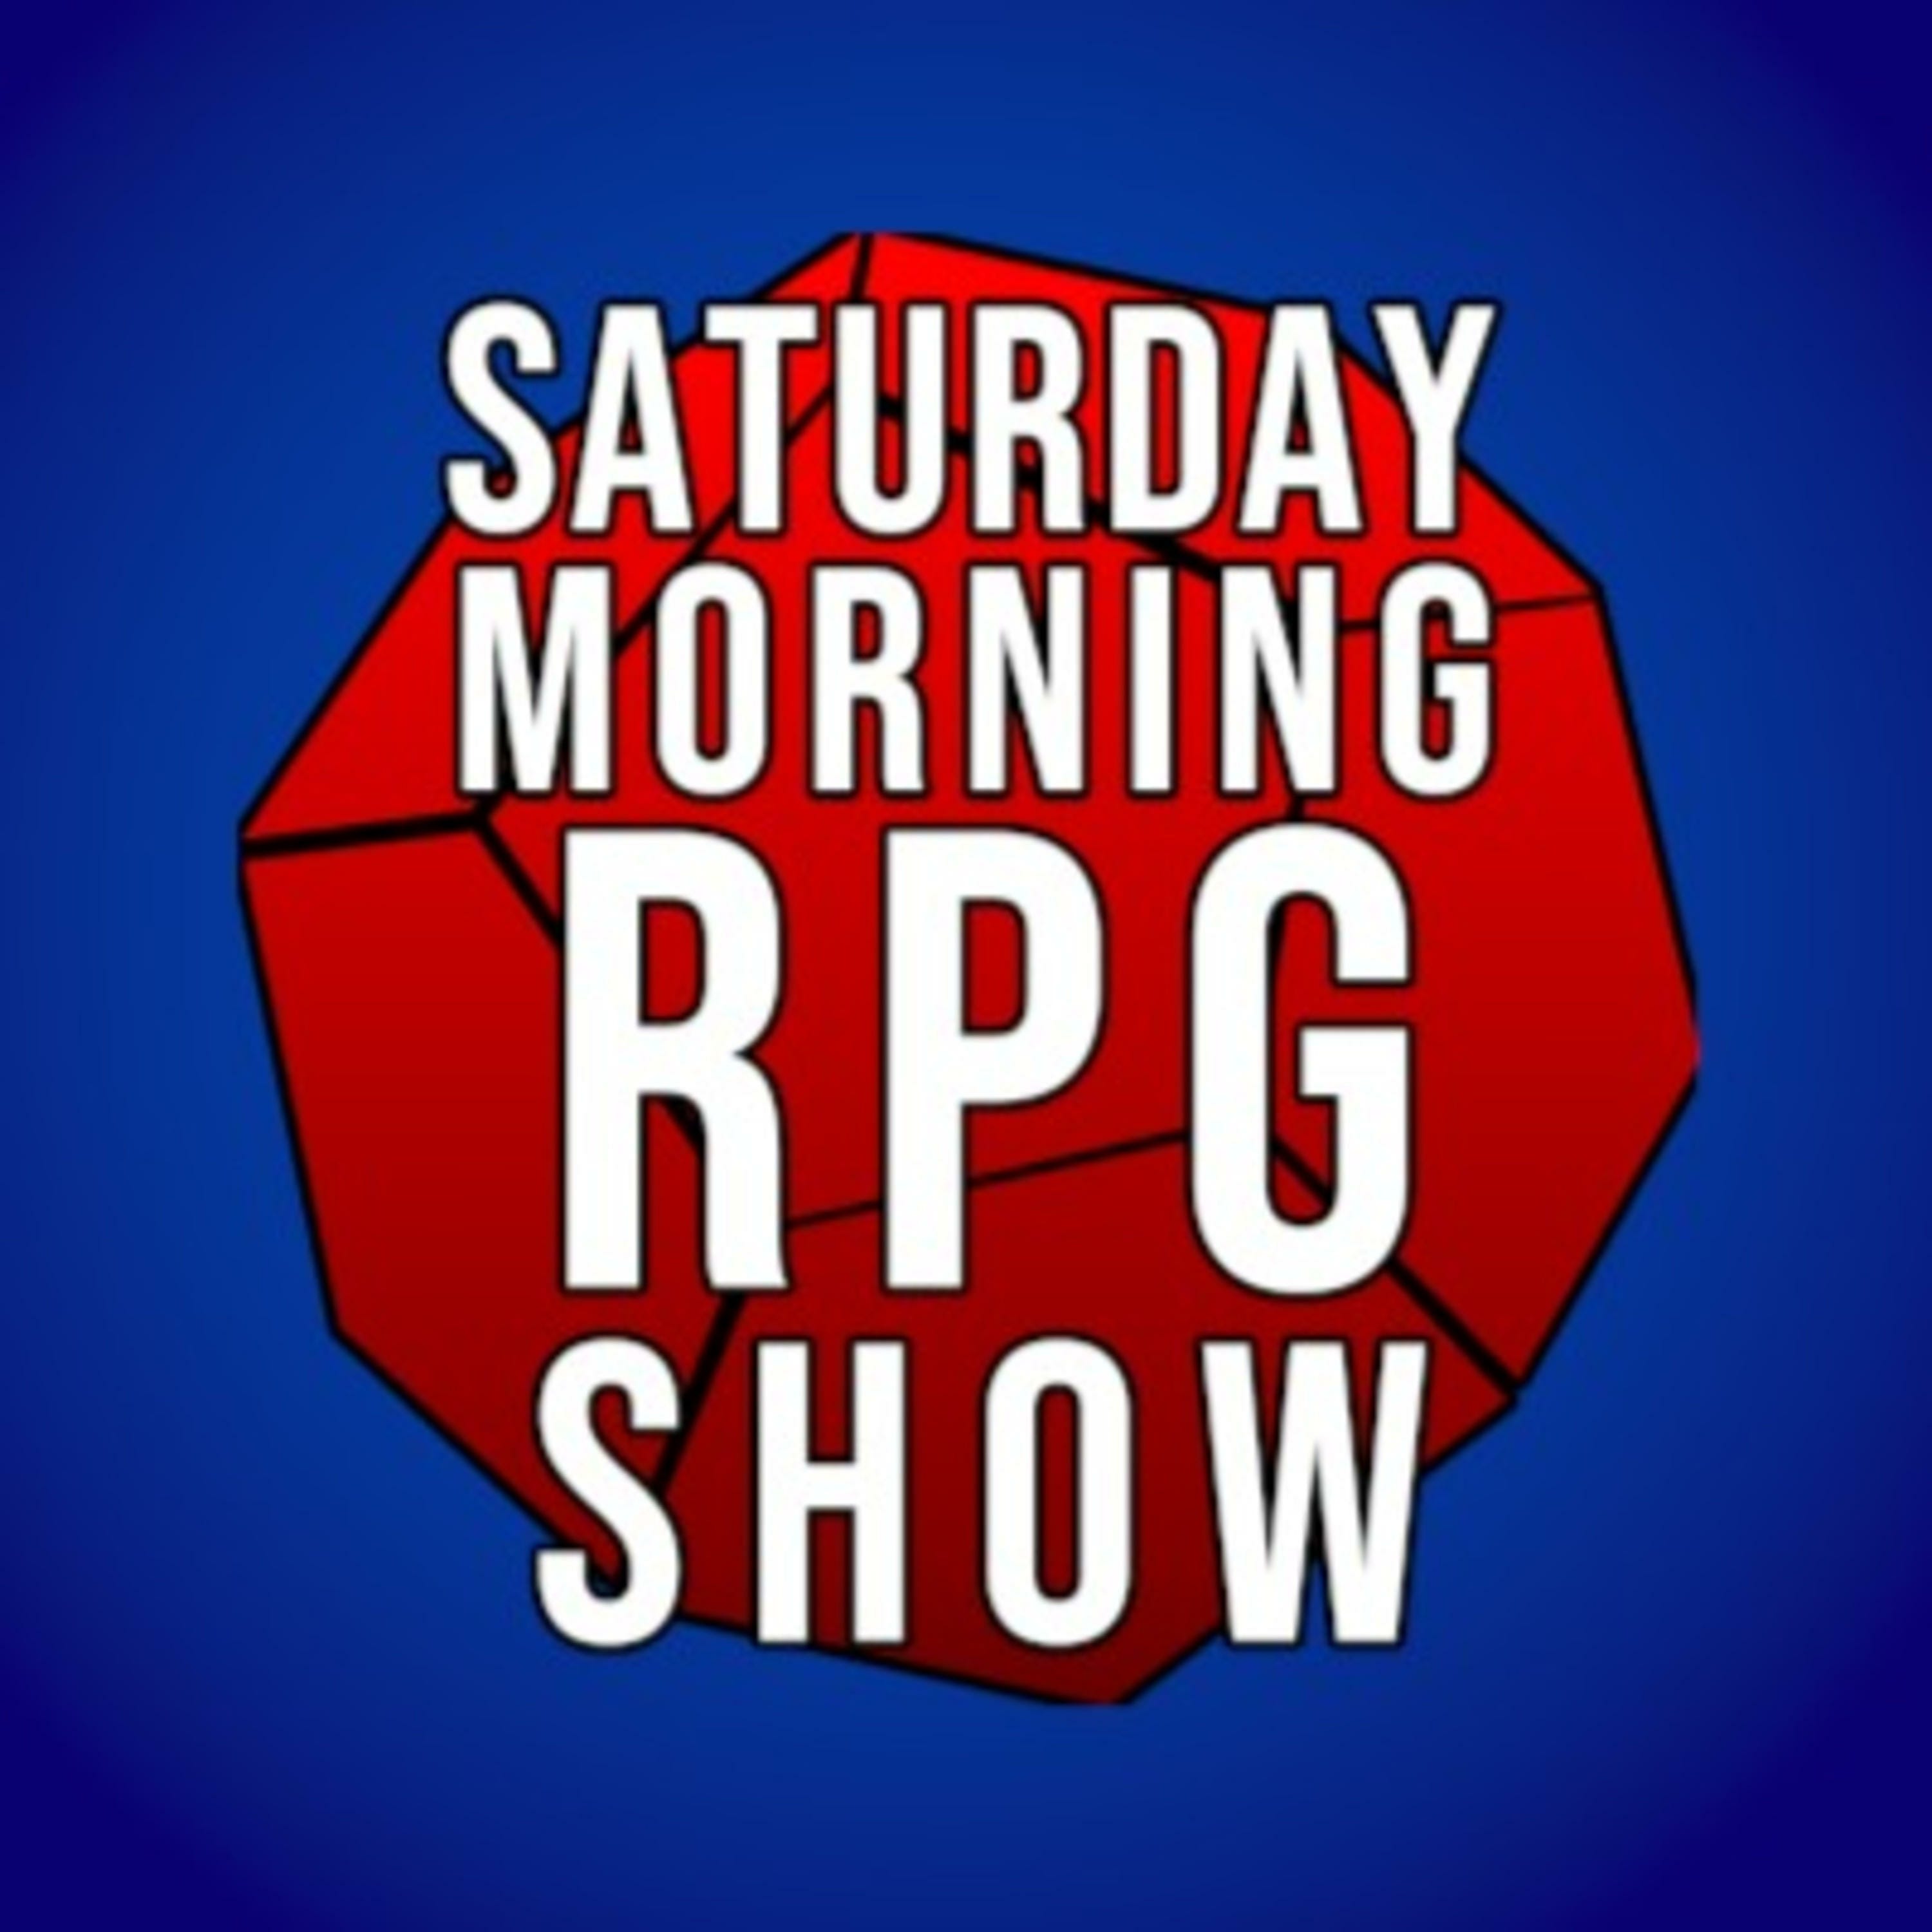 Ep 43 - SMDnD Show - Campaign Settings and GameHole Con!